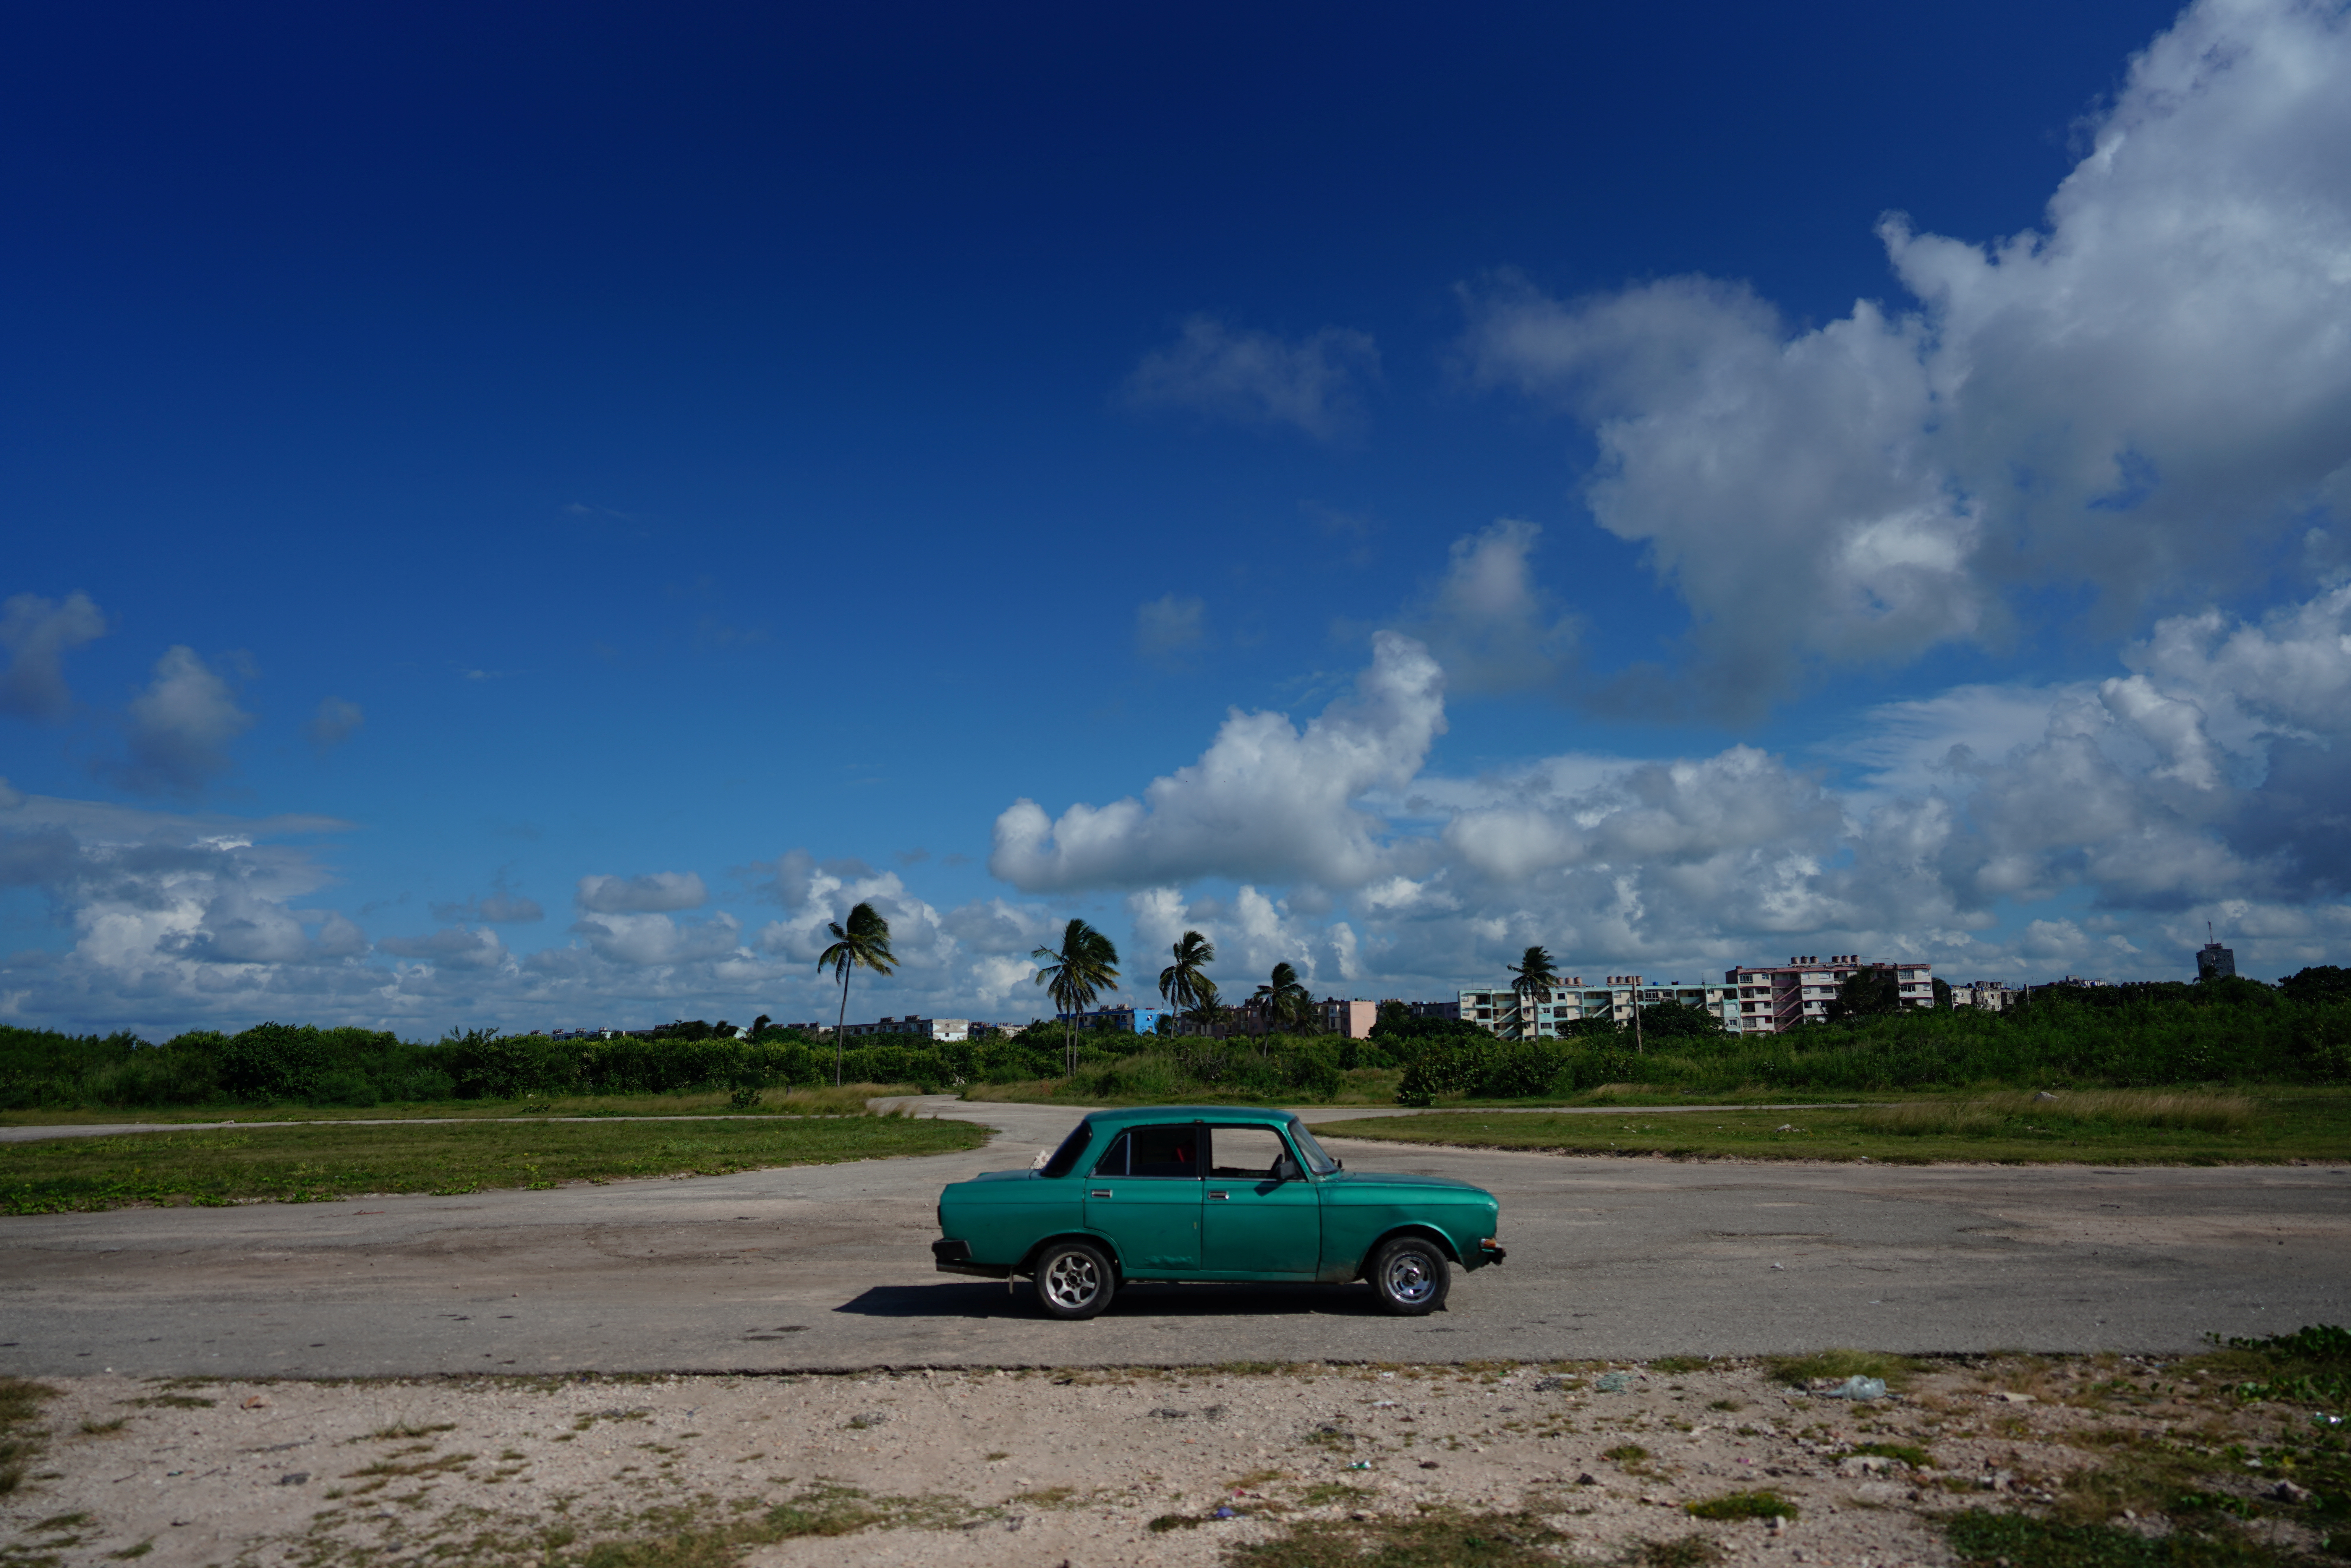 WhatsApp to war: How Cubans were recruited to fight for Russia